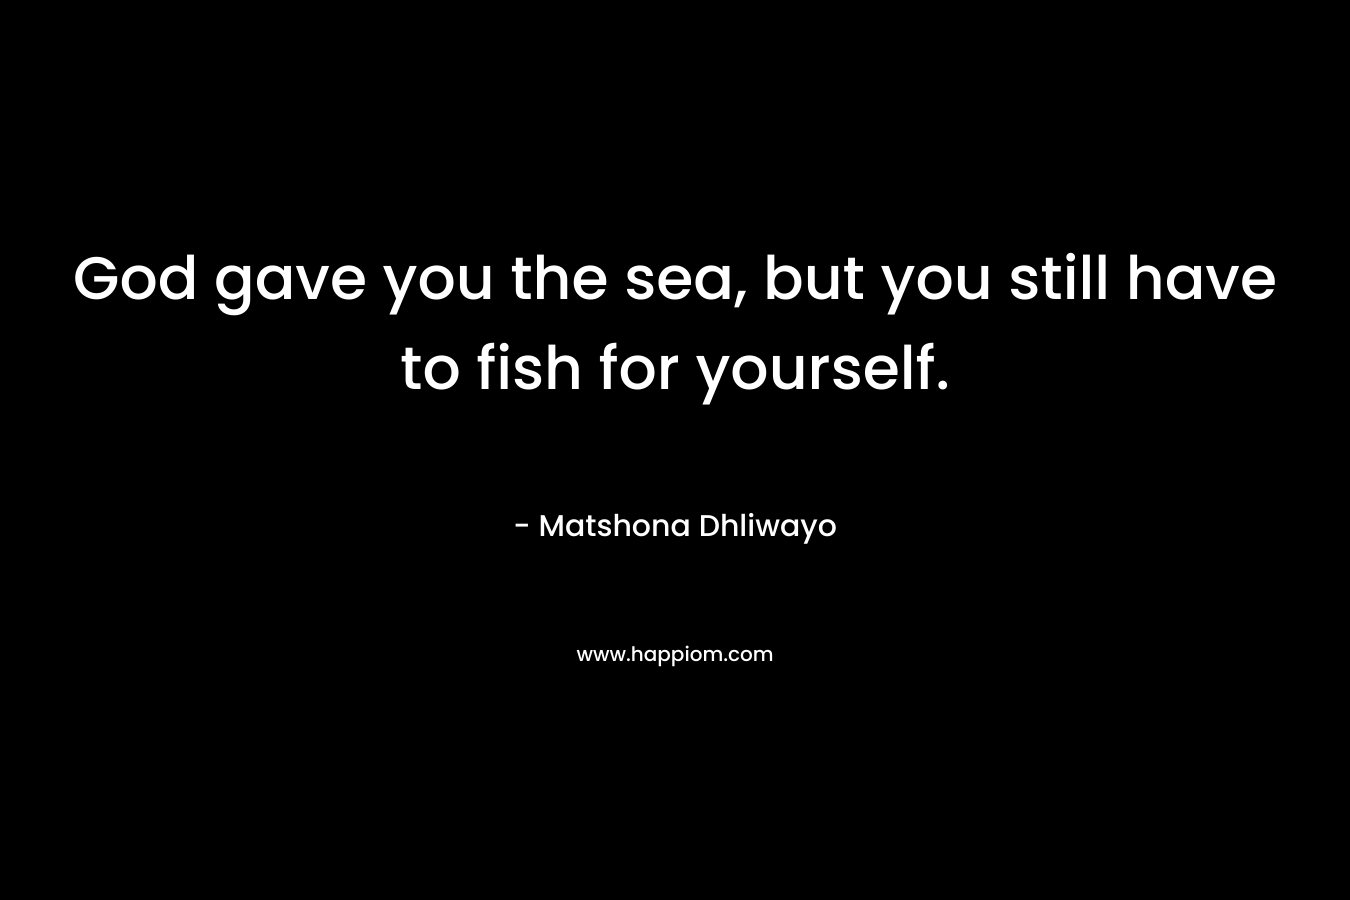 God gave you the sea, but you still have to fish for yourself.